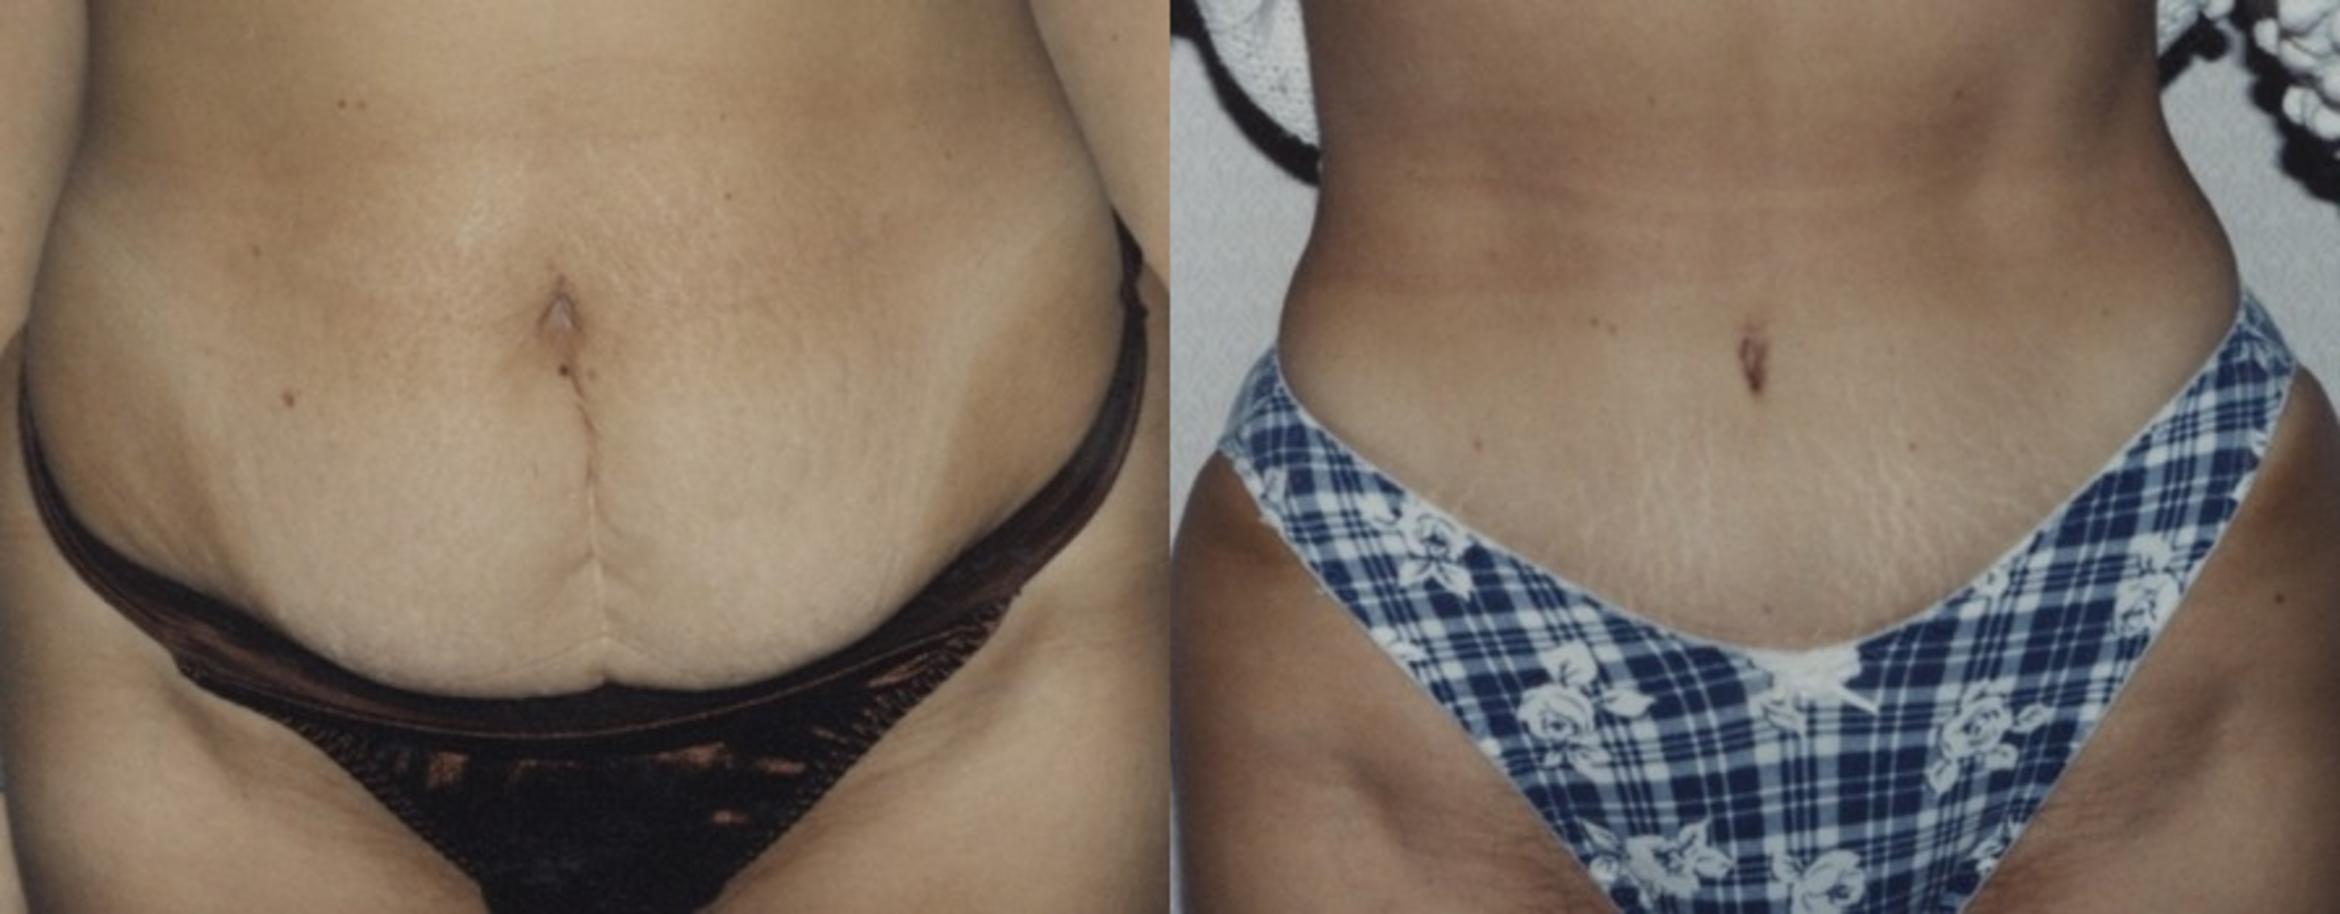 Abdominoplasty (Tummy Tuck) Before & After Photo | New Jersey & Pennsylvania,  | The Derm Group